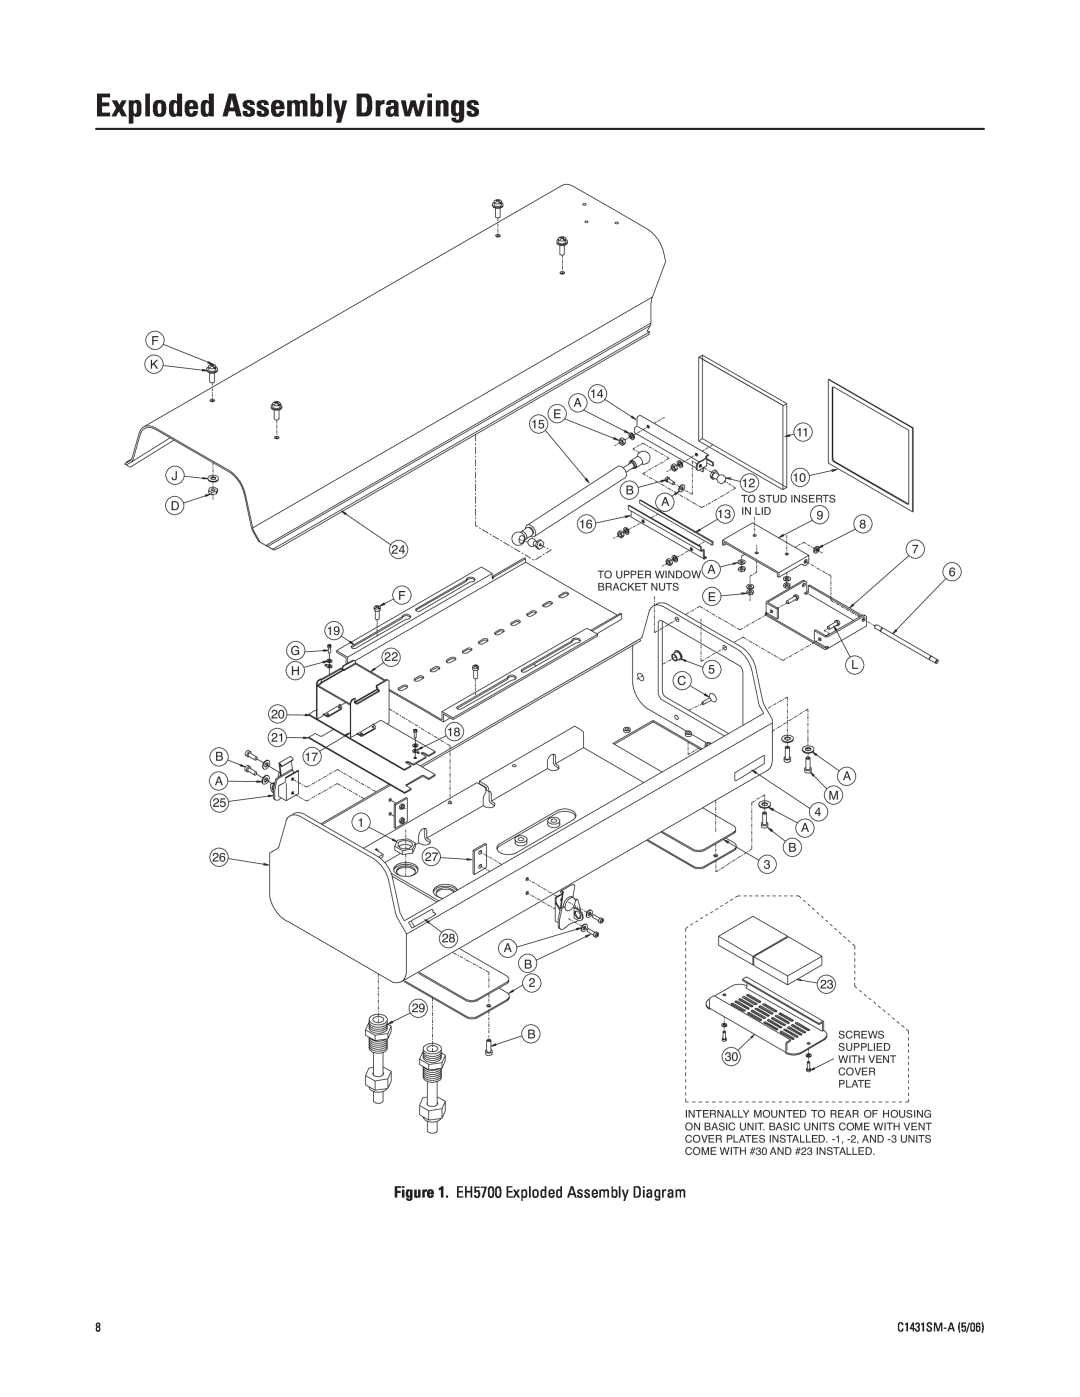 Pelco EH5700 Series manual Exploded Assembly Drawings, EH5700 Exploded Assembly Diagram 